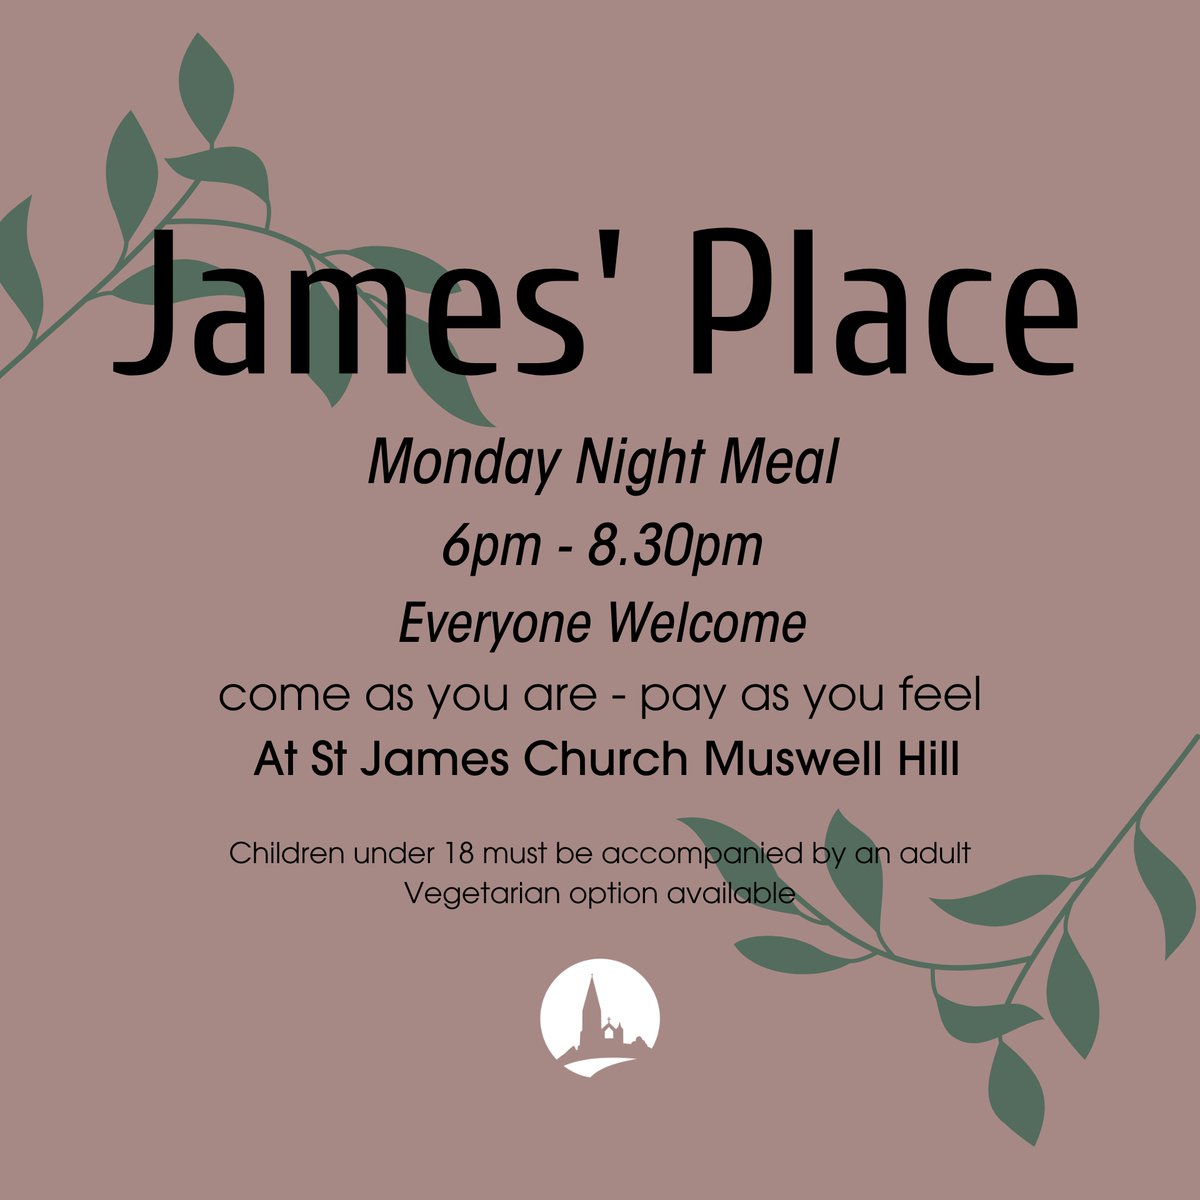 JAMES' PLACE
Join us tonight and Mondays from 6pm (Excluding Bank Holidays)

#londonchurch #london #church #northlondon #muswellhill #community #communitycafe #communitymeal #churchinthecommunity